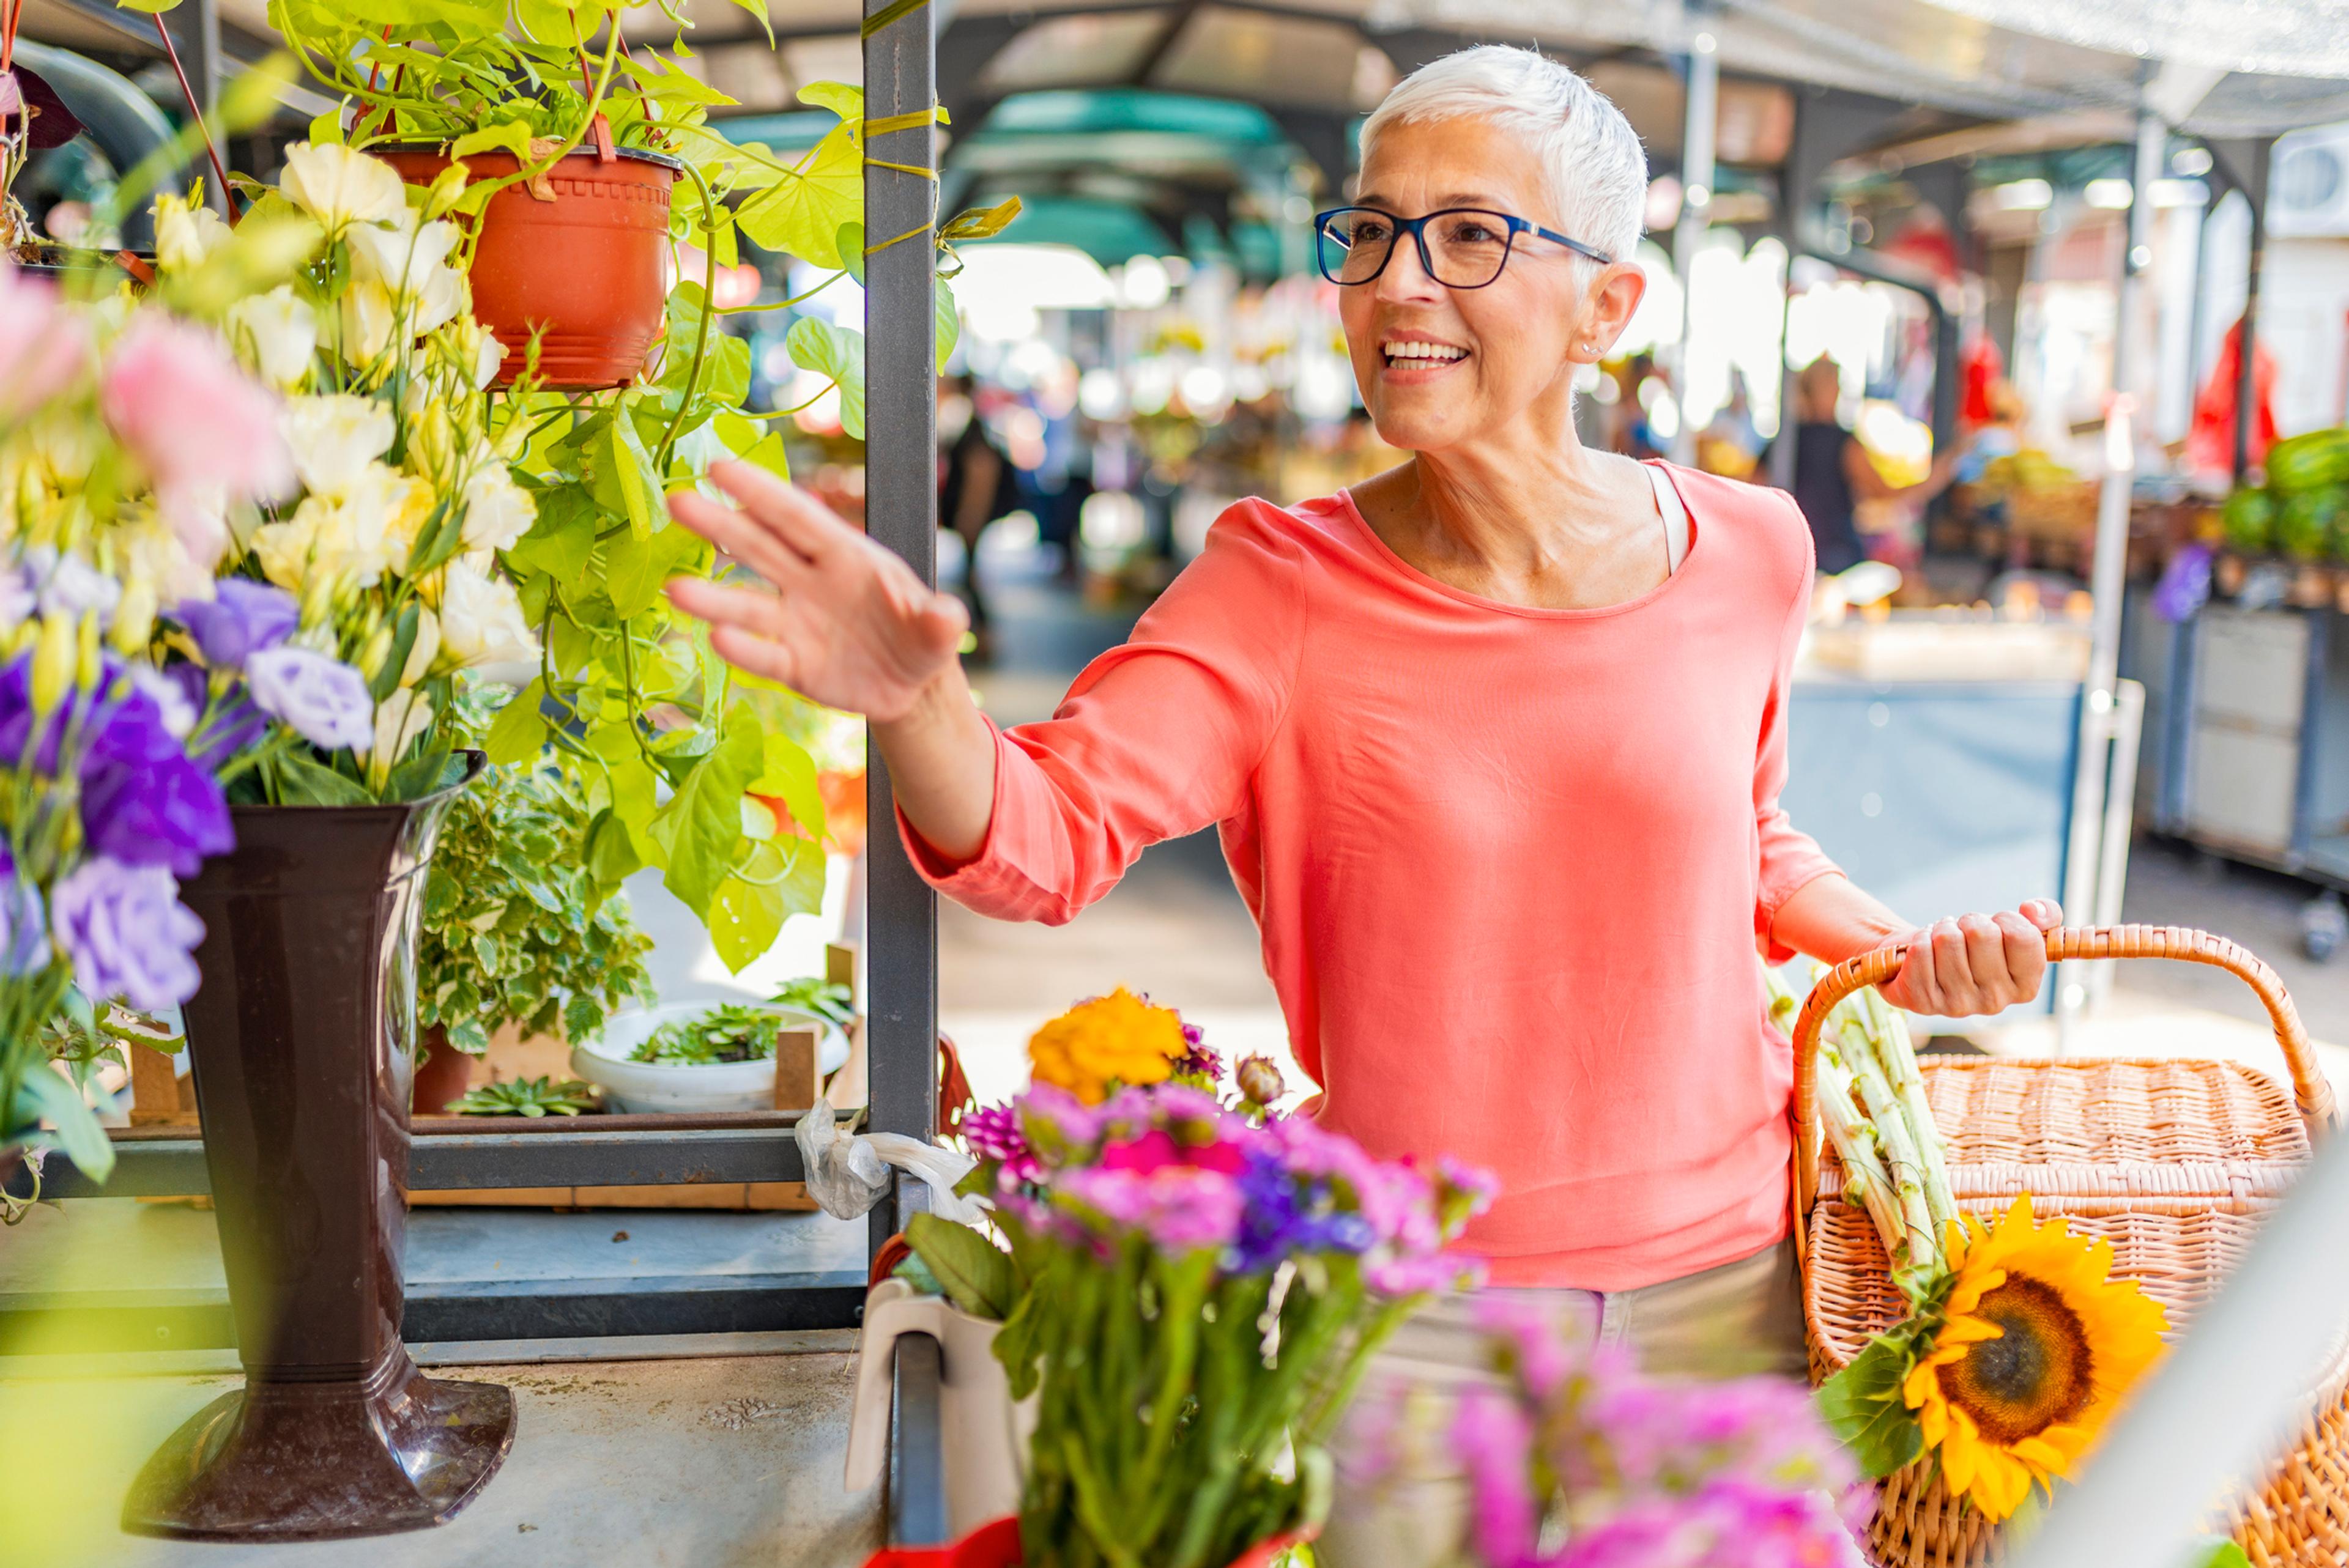 A lady with short white hair is picking out flowers at an outdoor spring market.